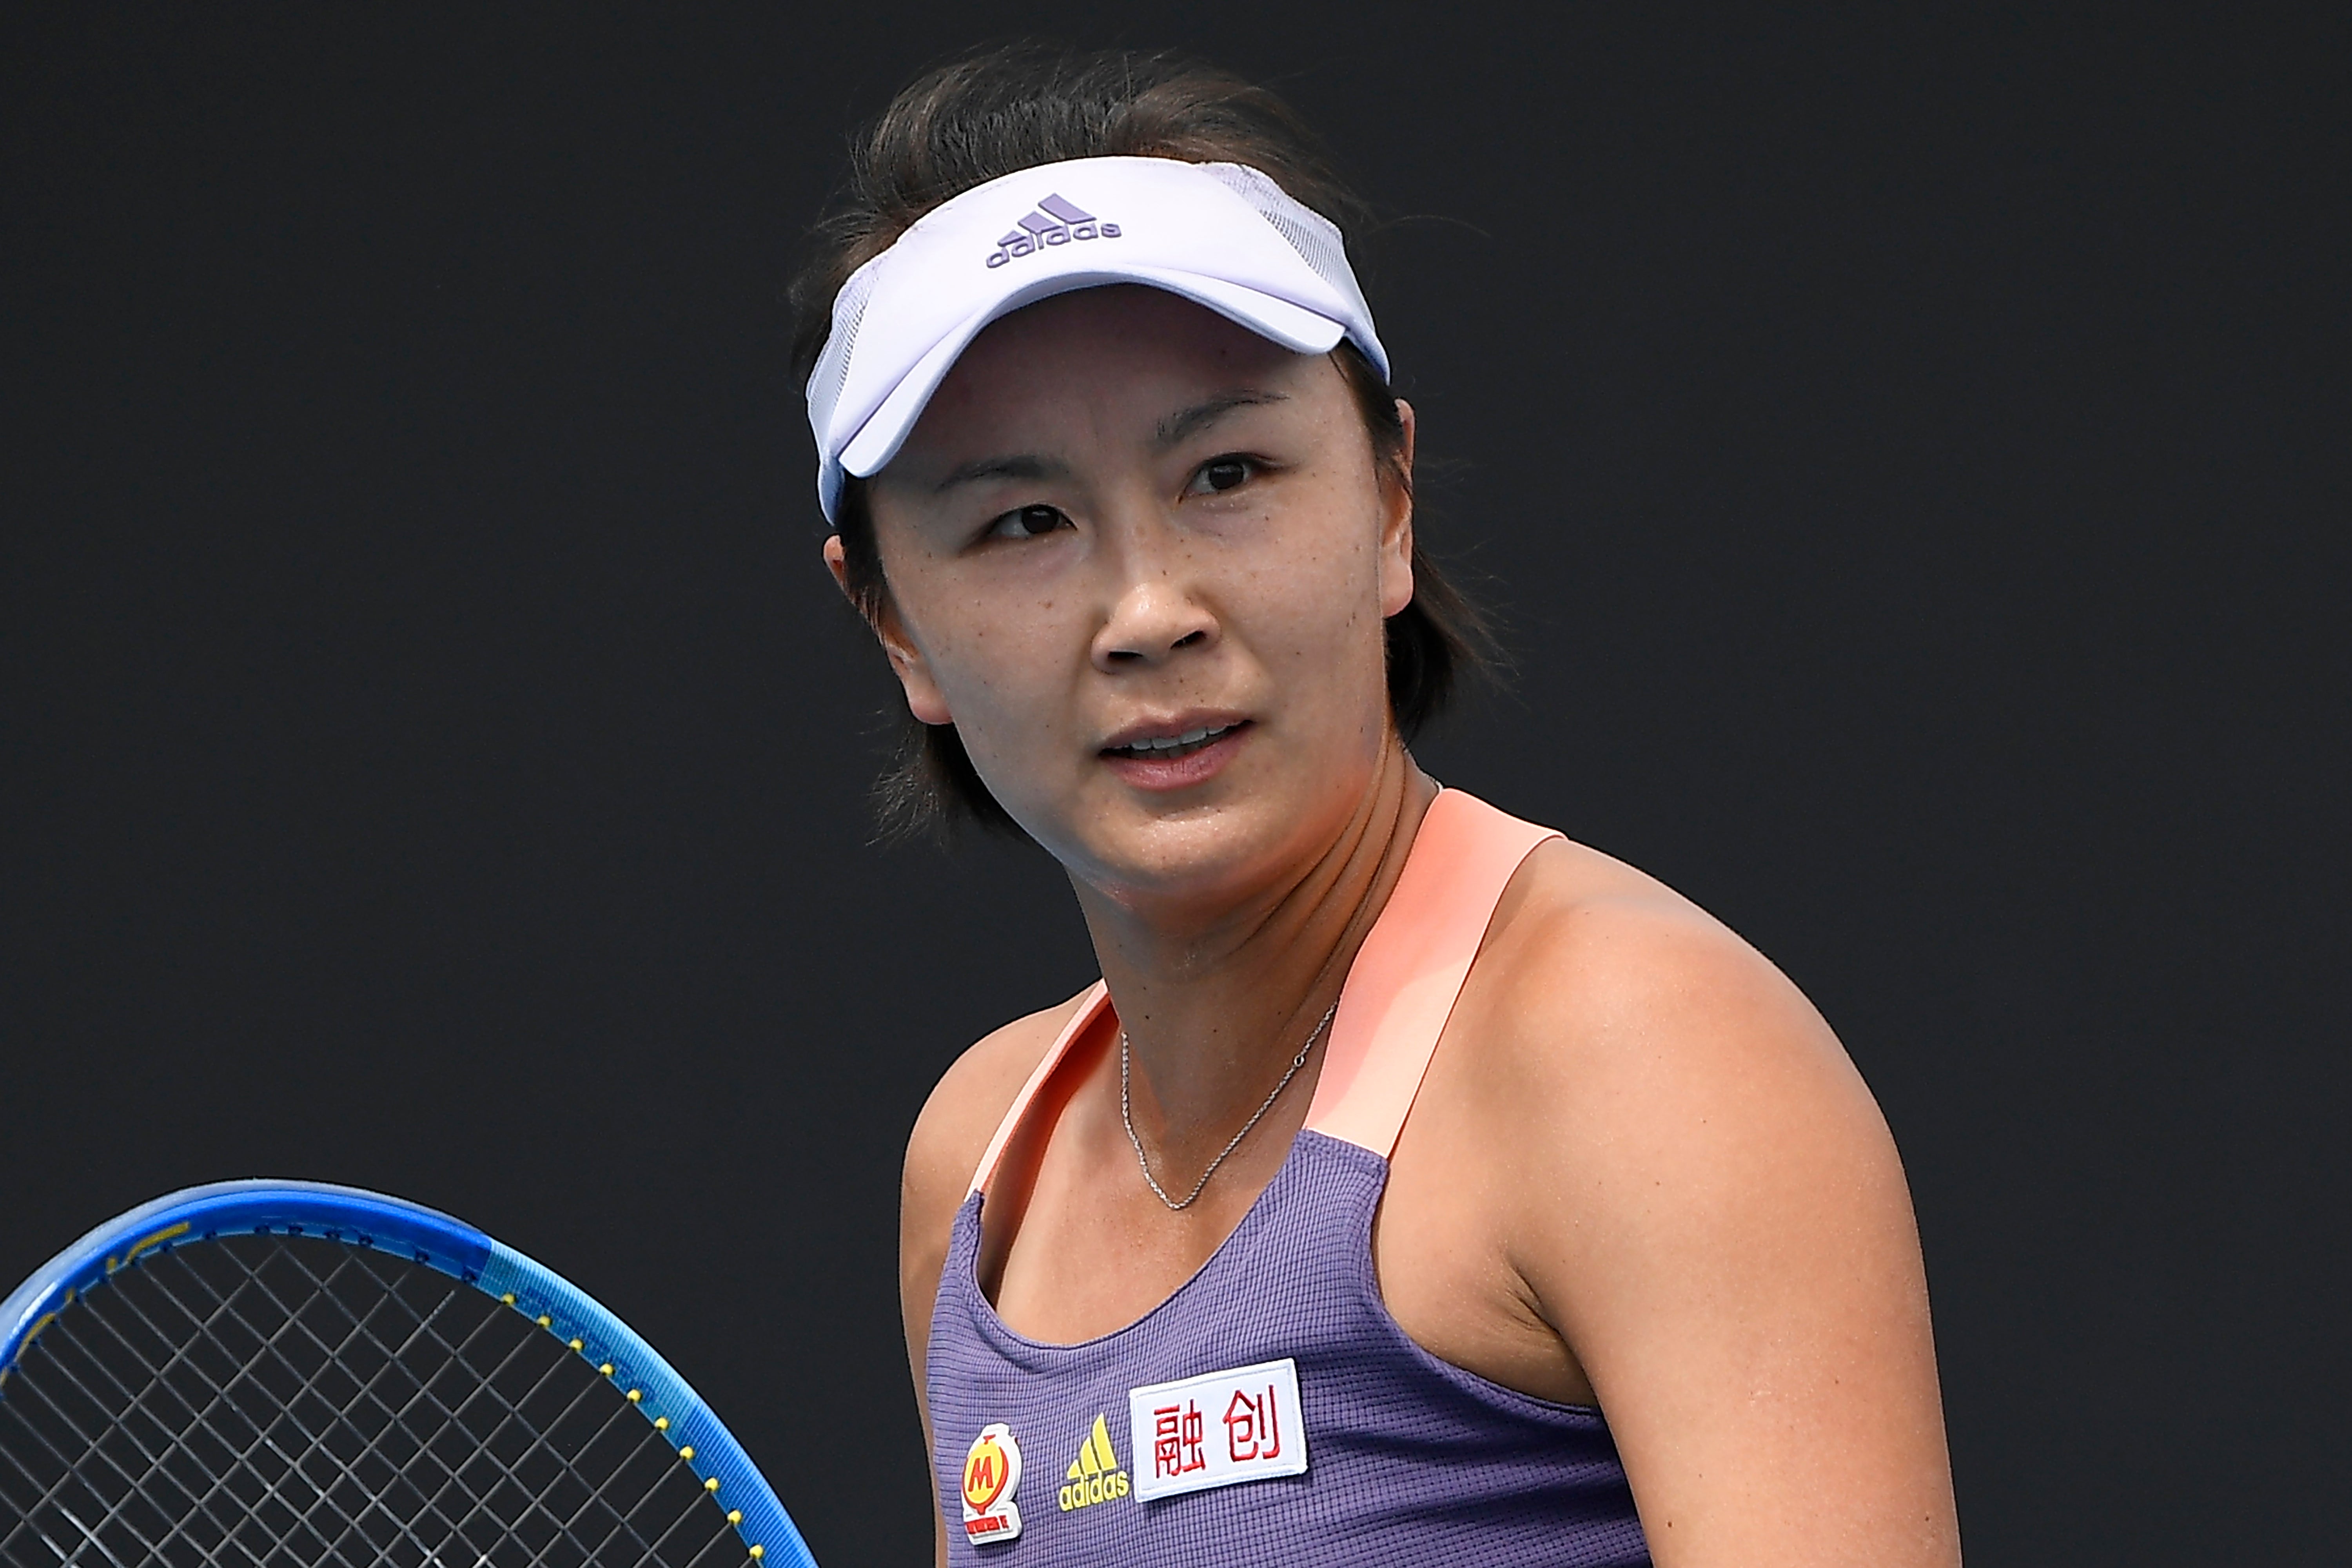 ITF resumes tennis in China with no word on Peng Shuai The Independent